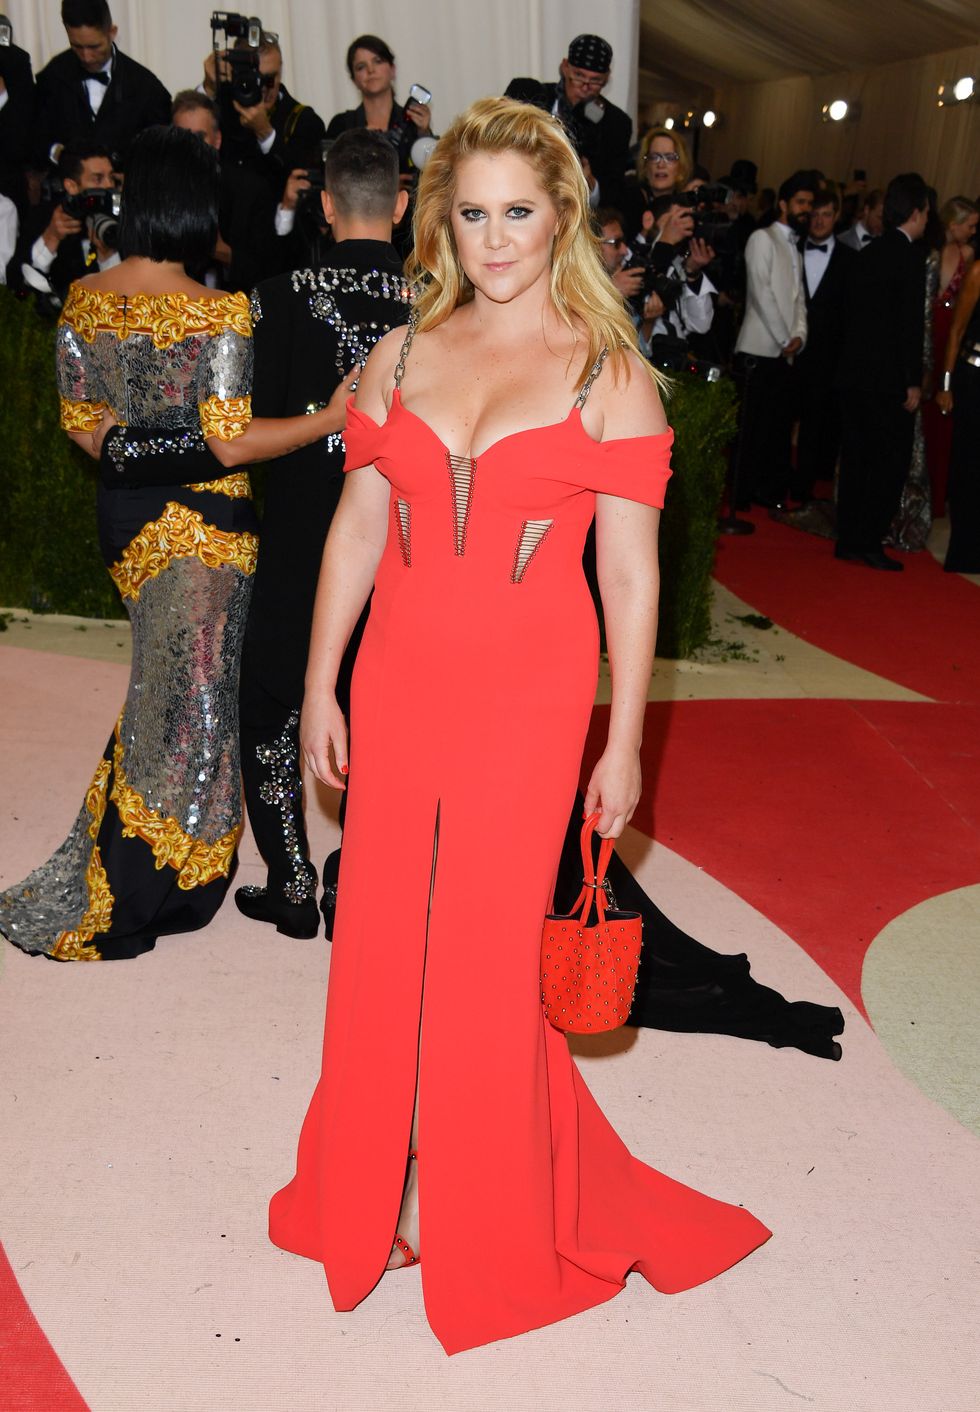 Amy Schumer just got VERY real about MET Gala prep and we love her for it